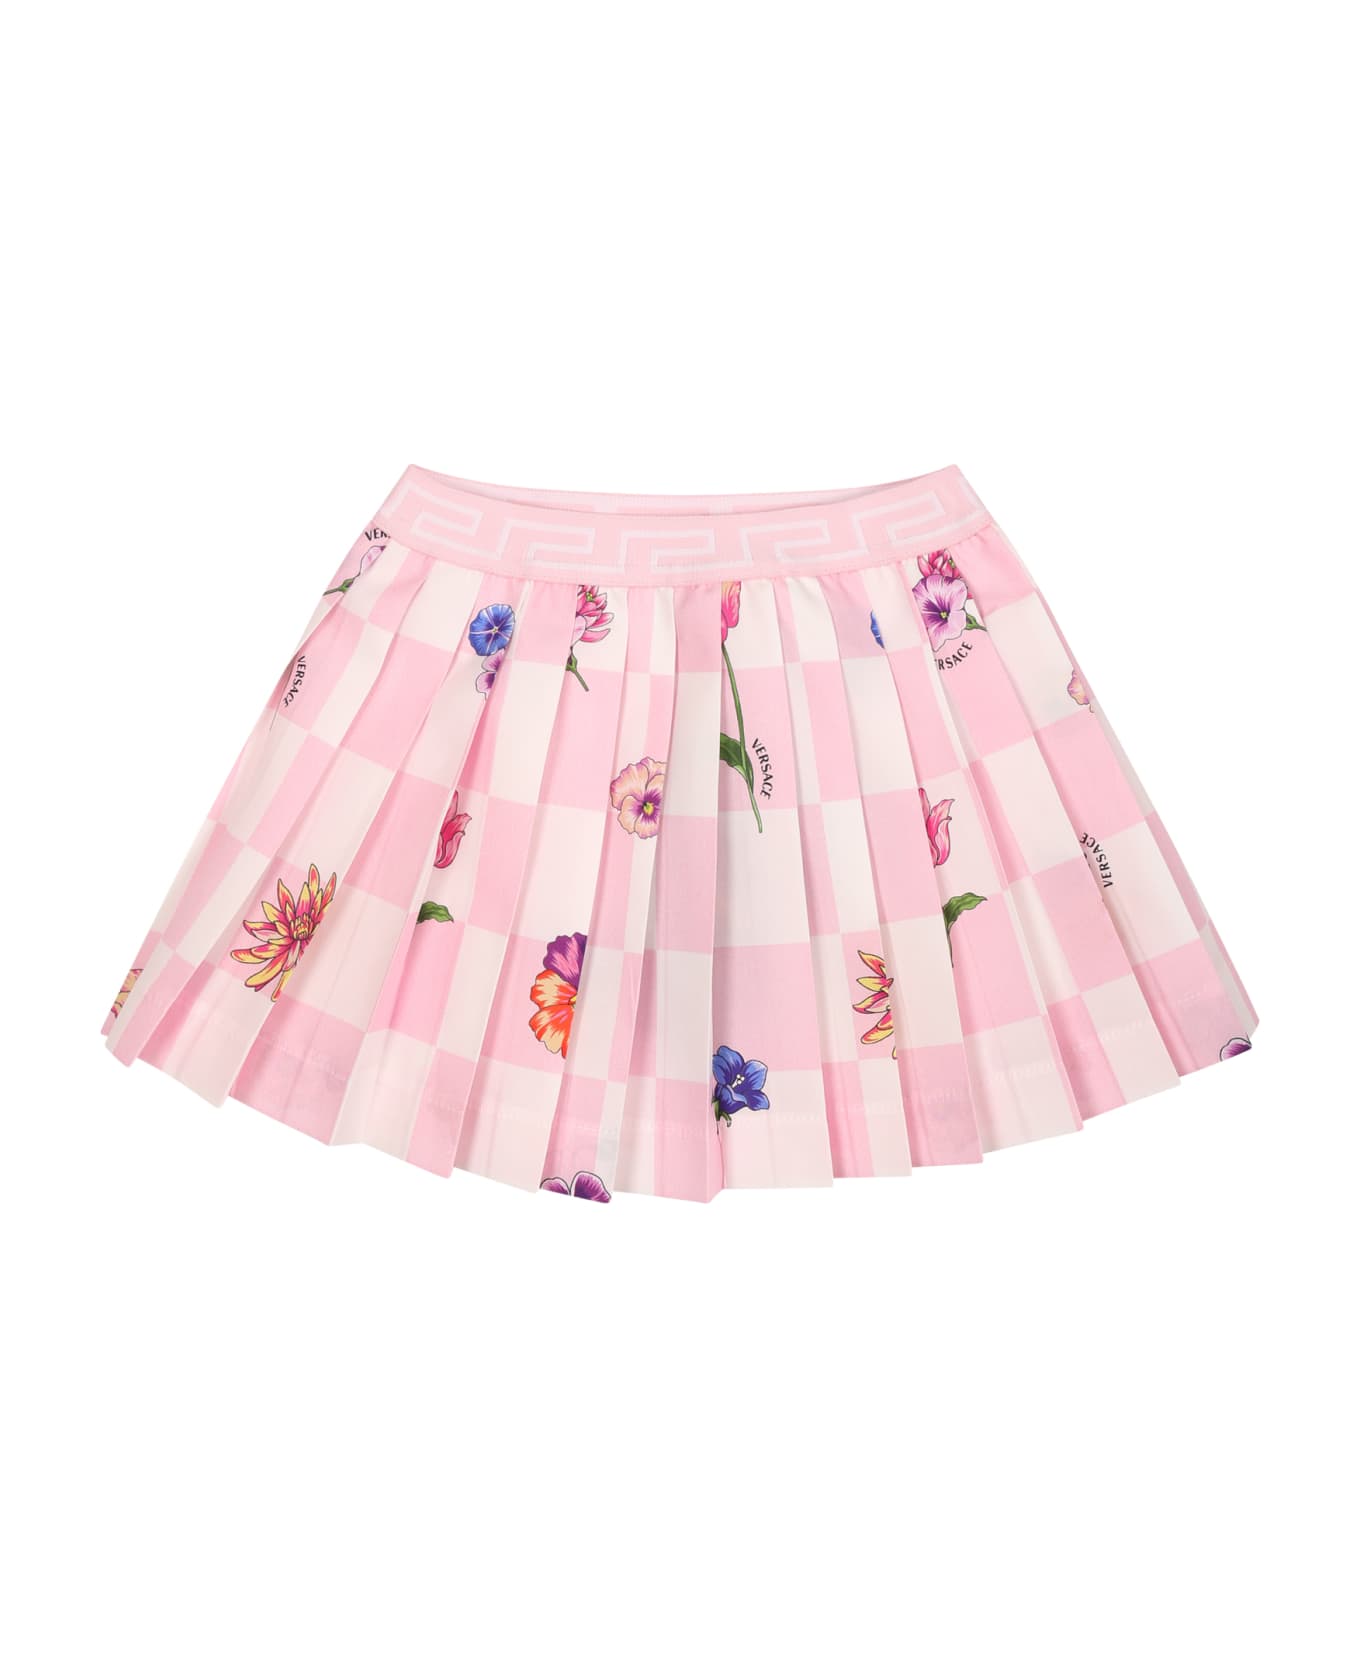 Versace Pink Skirt For Baby Girl With Flower Print - Pink ボトムス